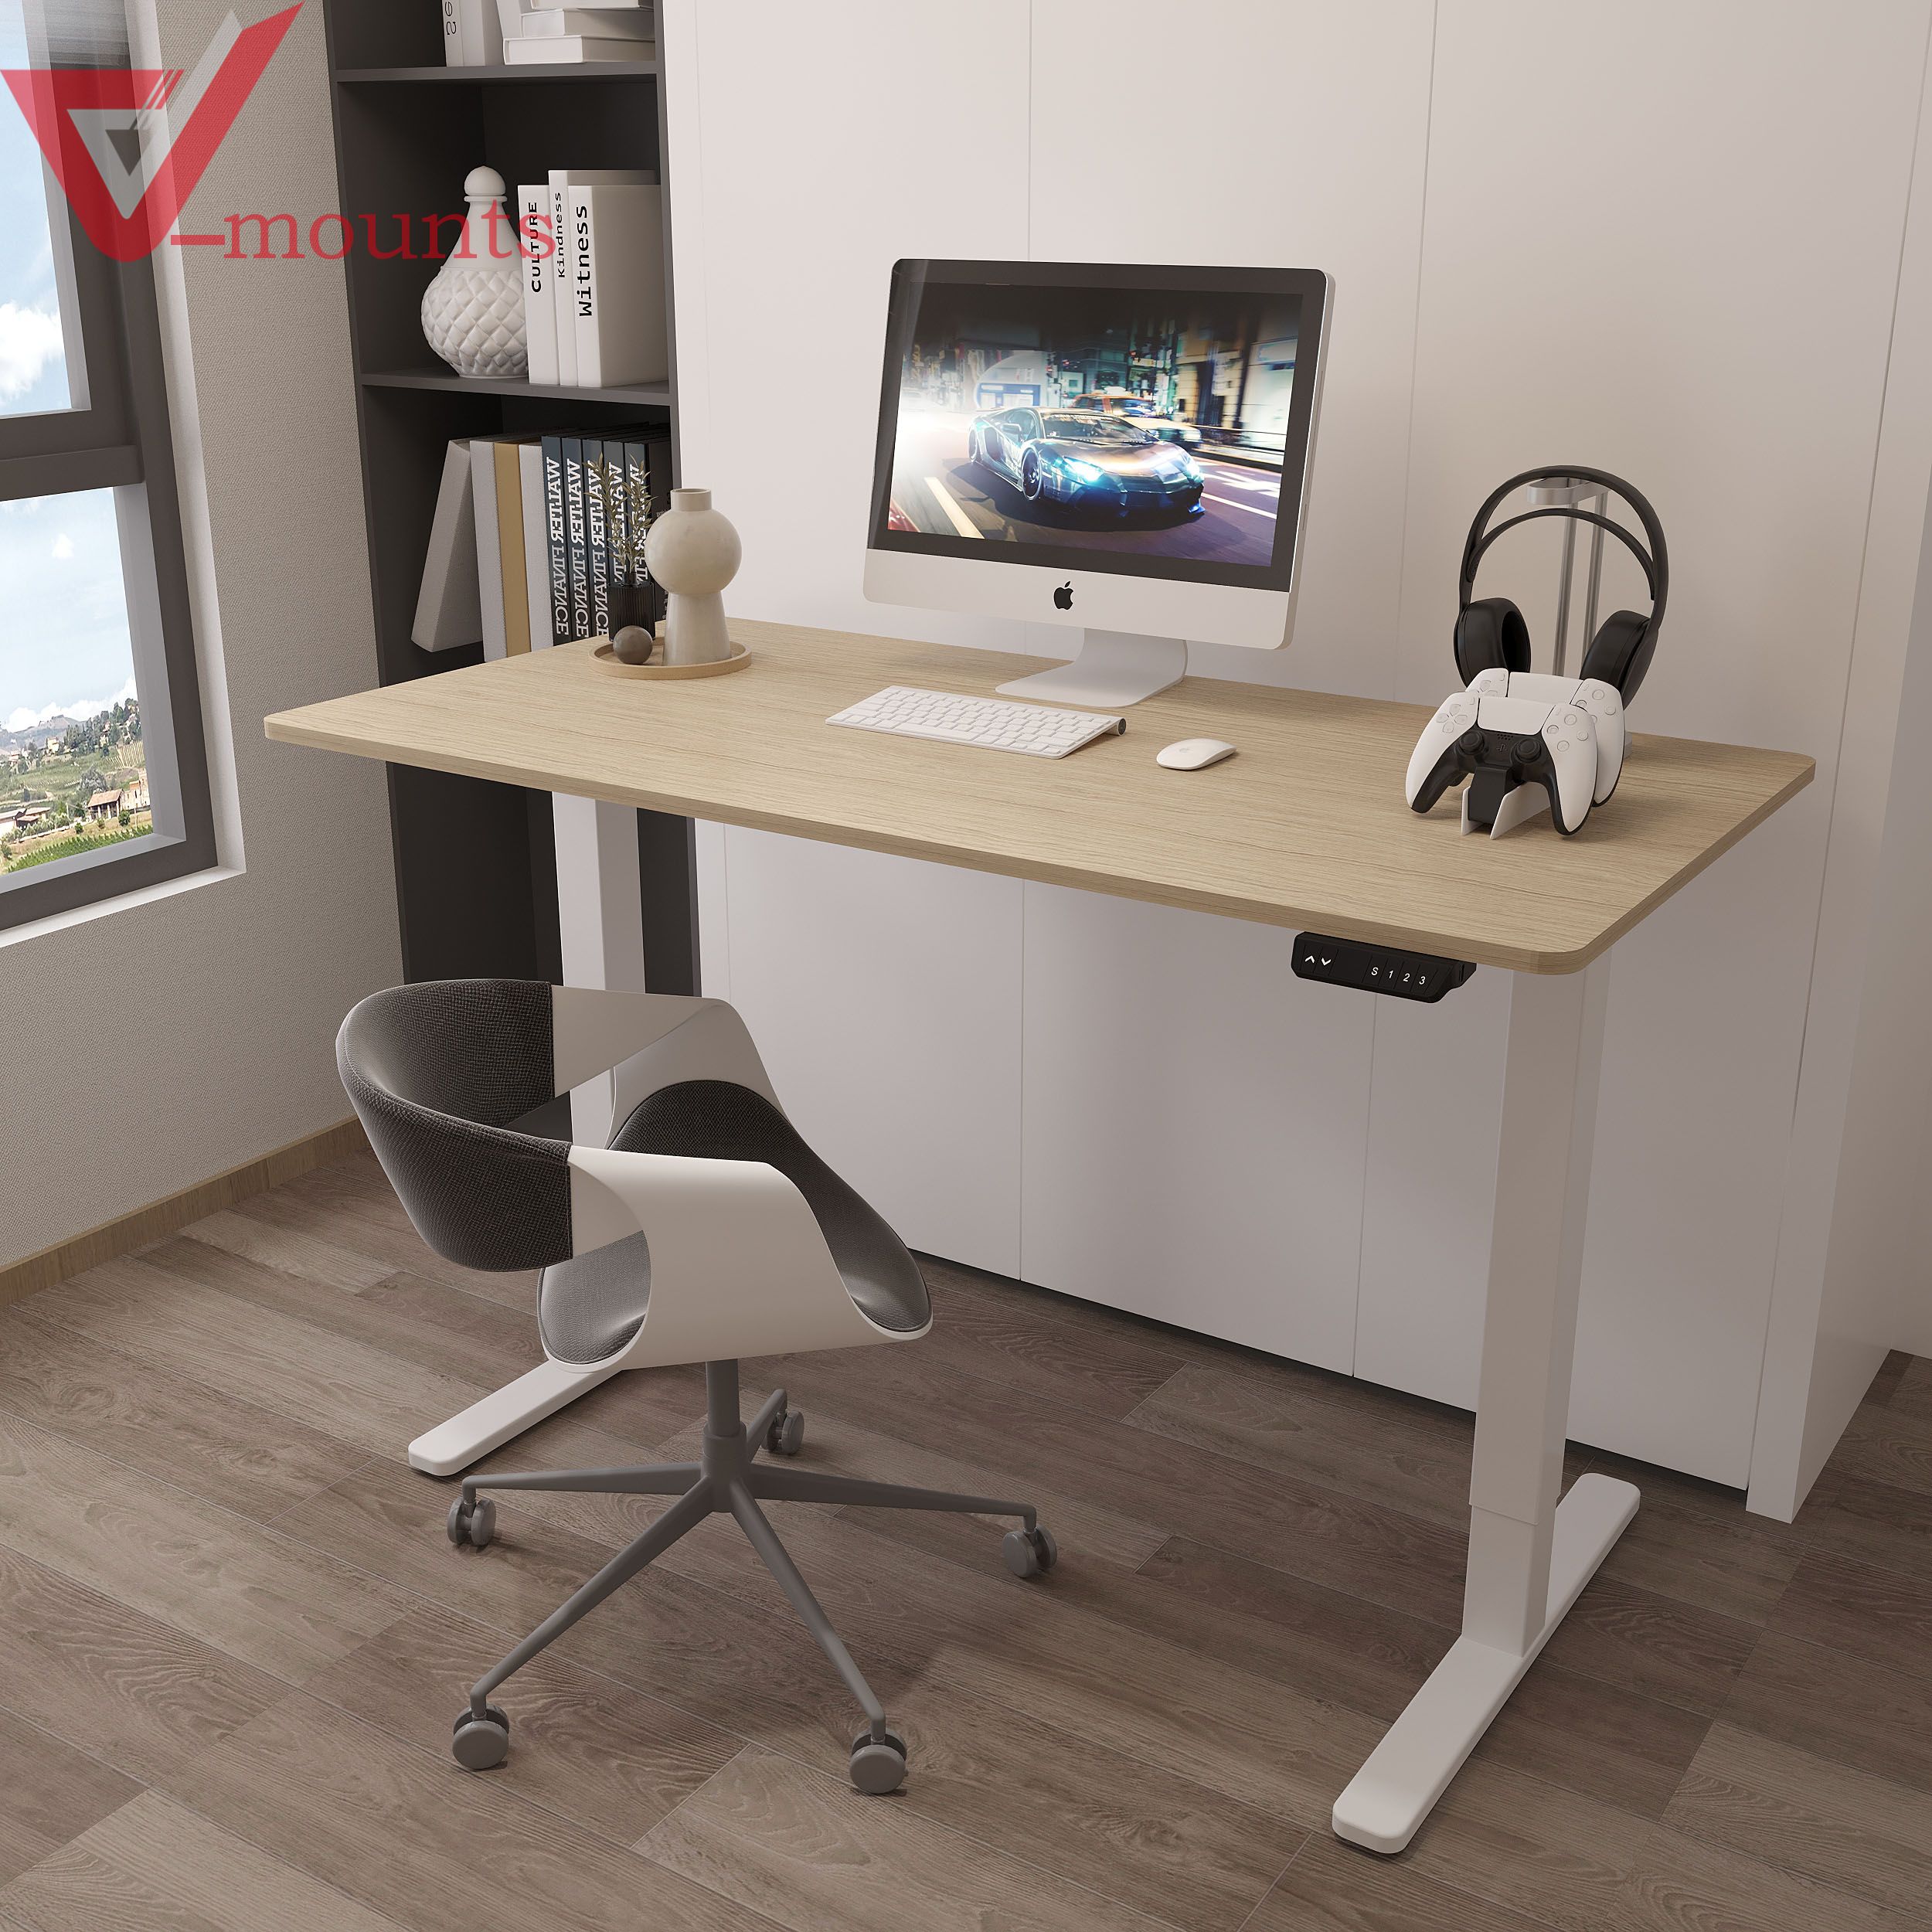 V-mounts Electric Dual Motor Height Adjustable Standing Desks With 1 Whole Board And Rectangular Legs VM-JSD2-02-1P